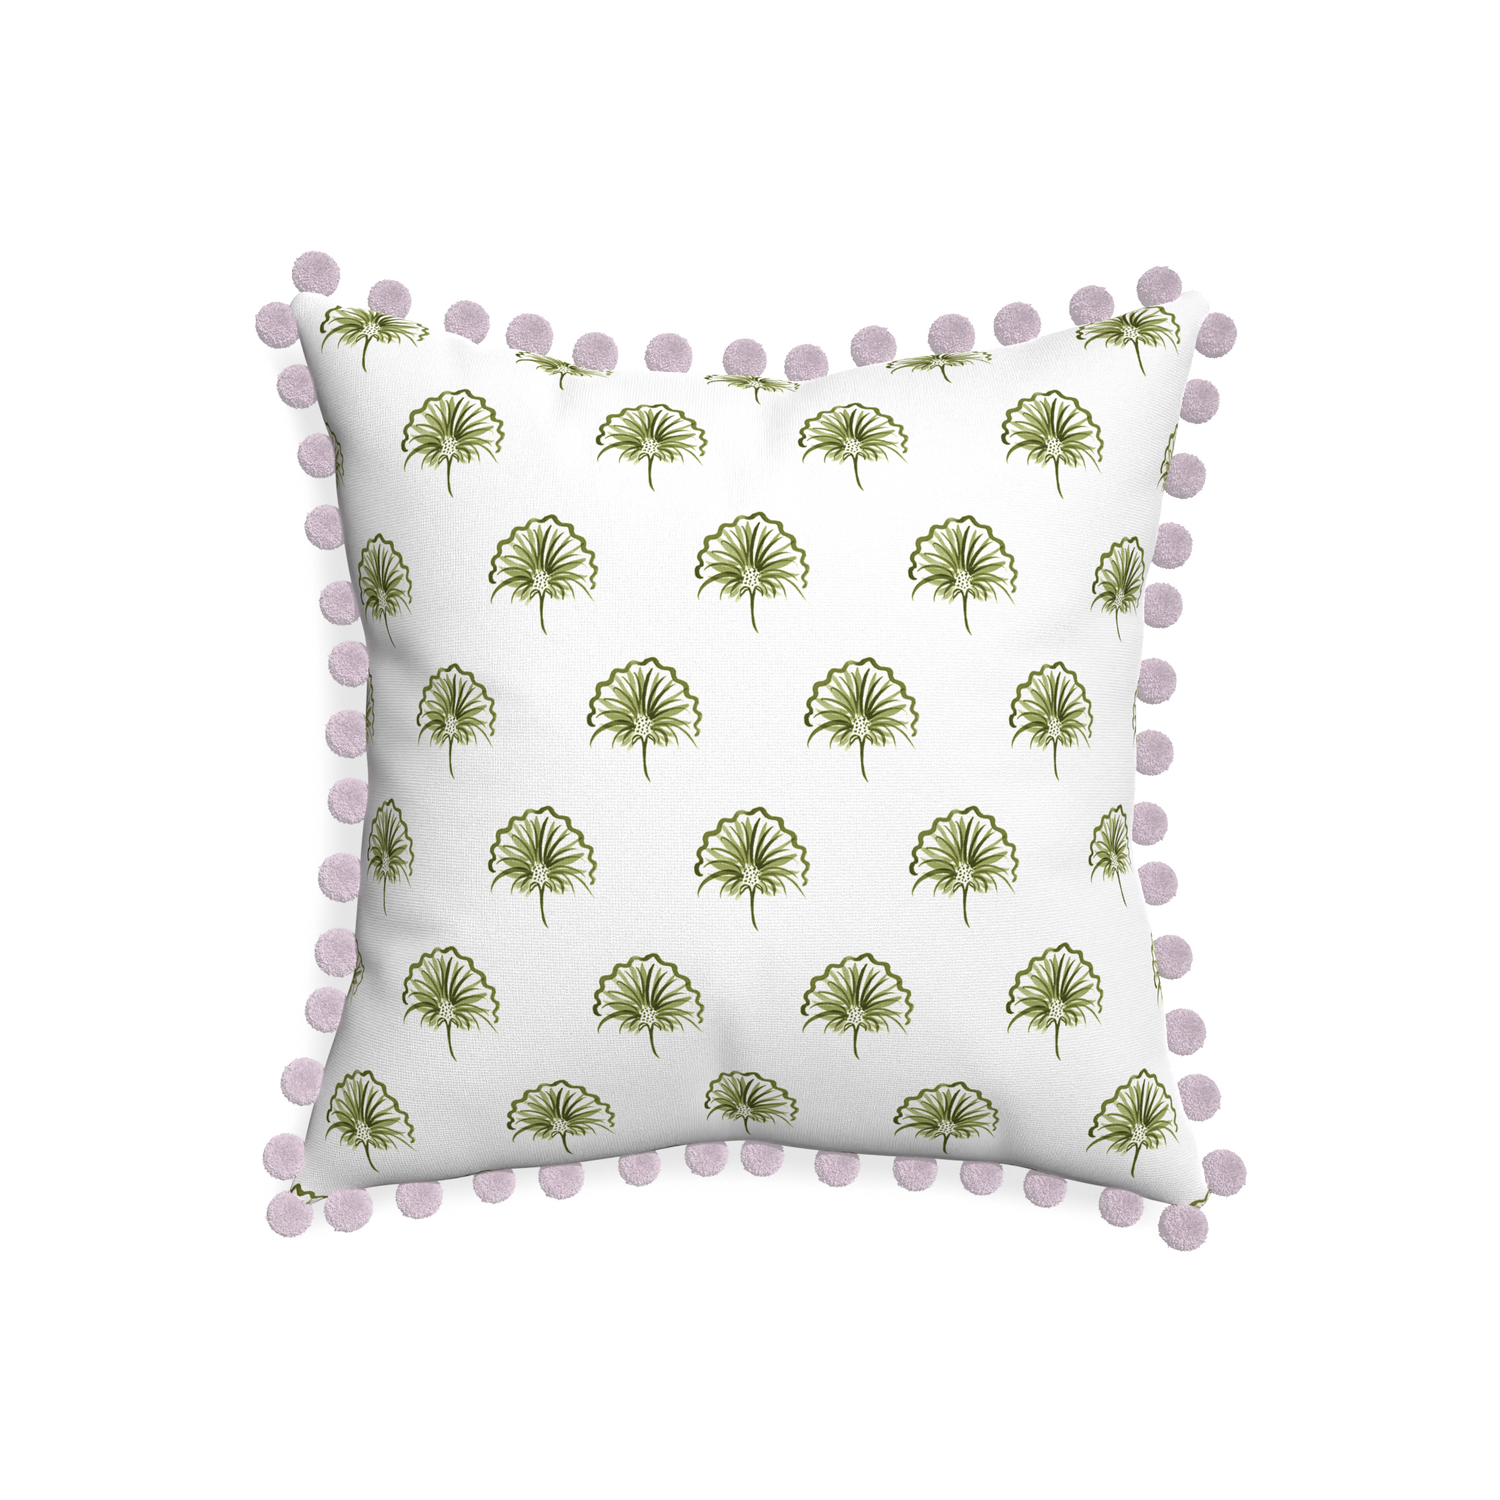 20-square penelope moss custom pillow with l on white background